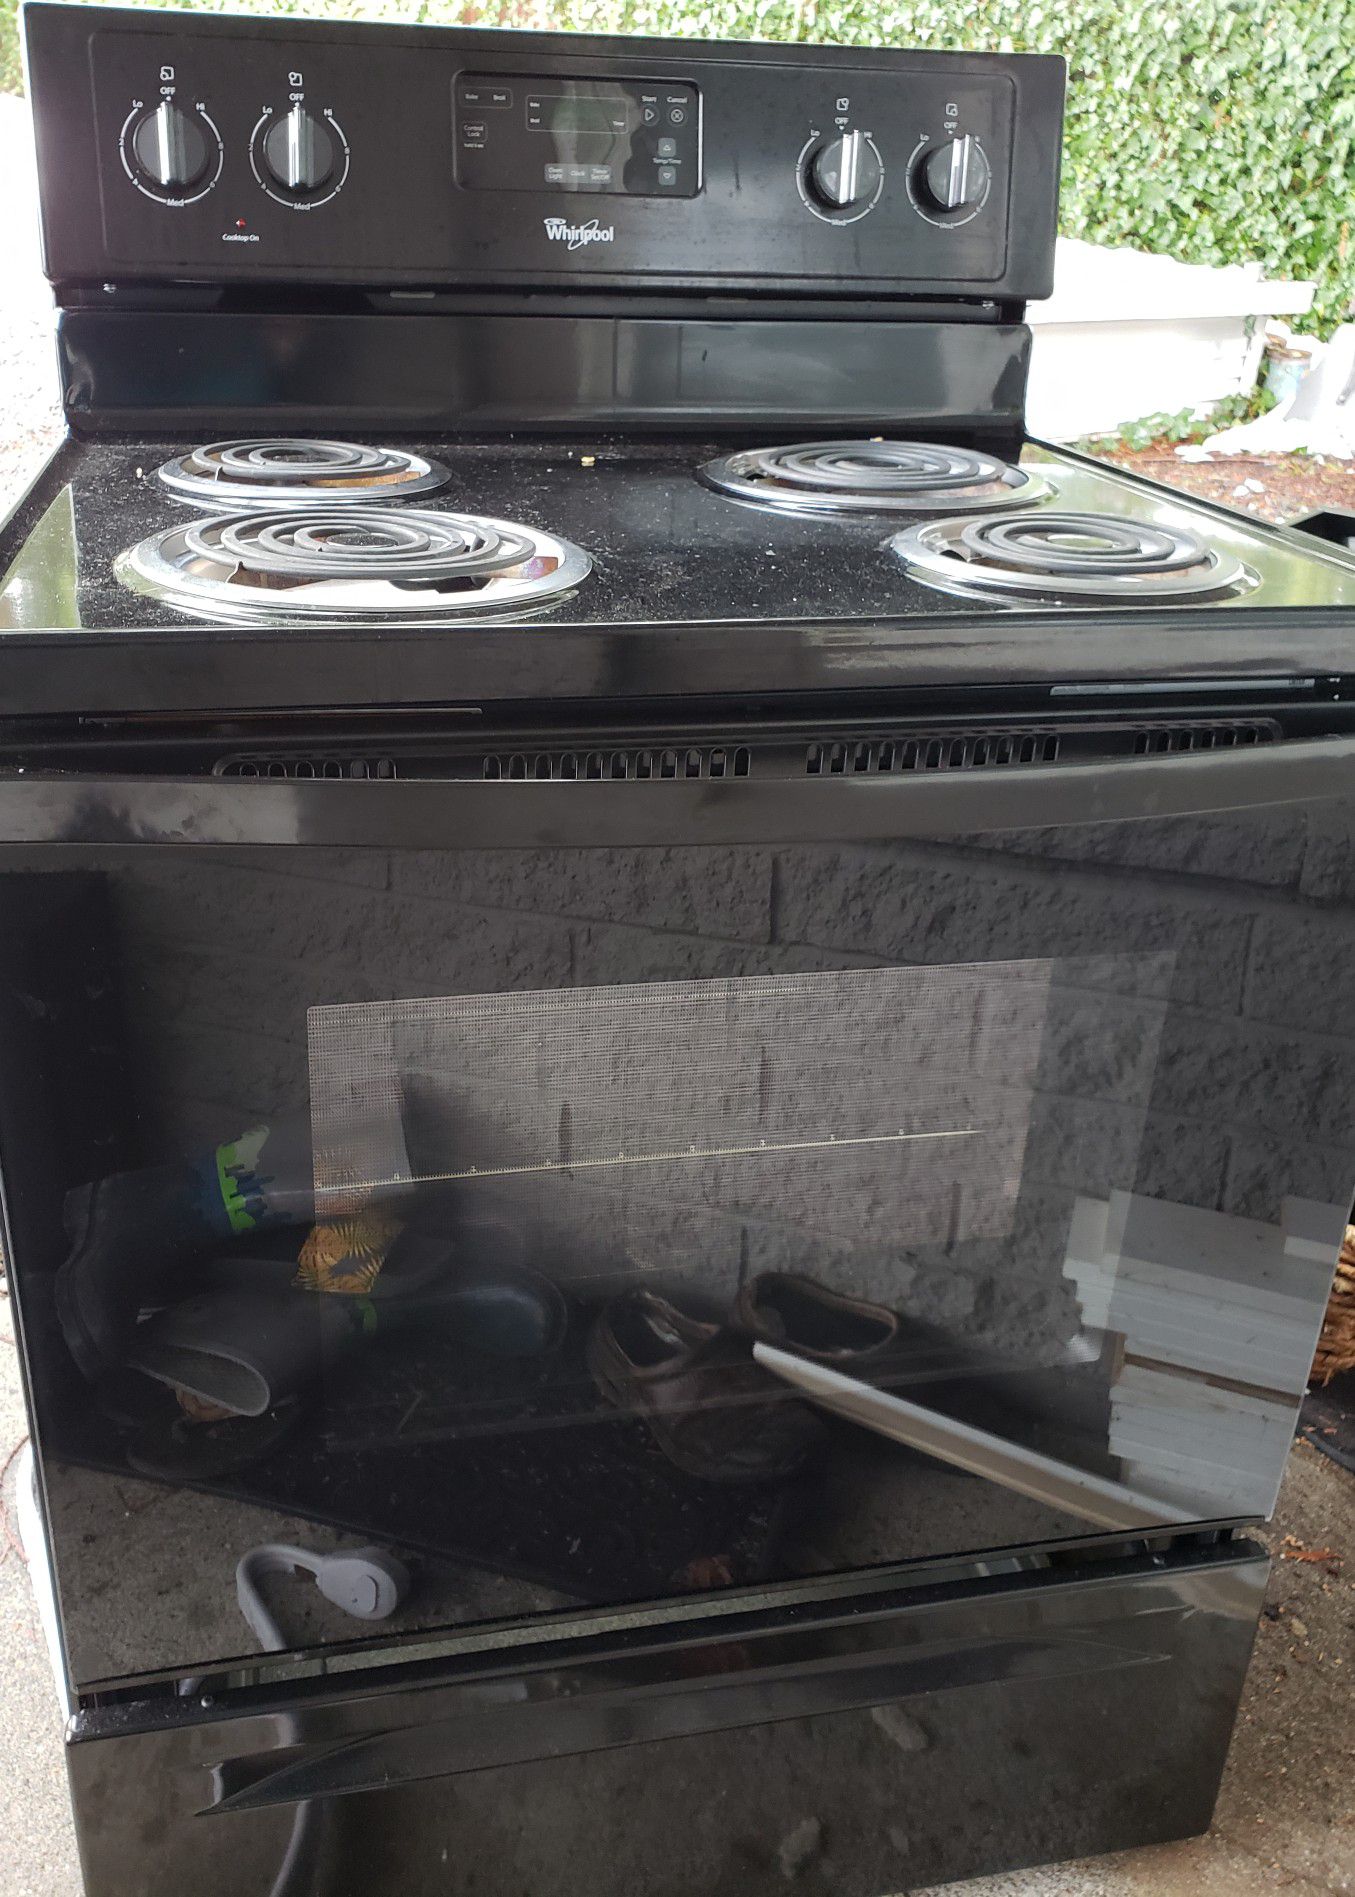 Whirlpool black electric stove oven & range. Used less than 6 months.